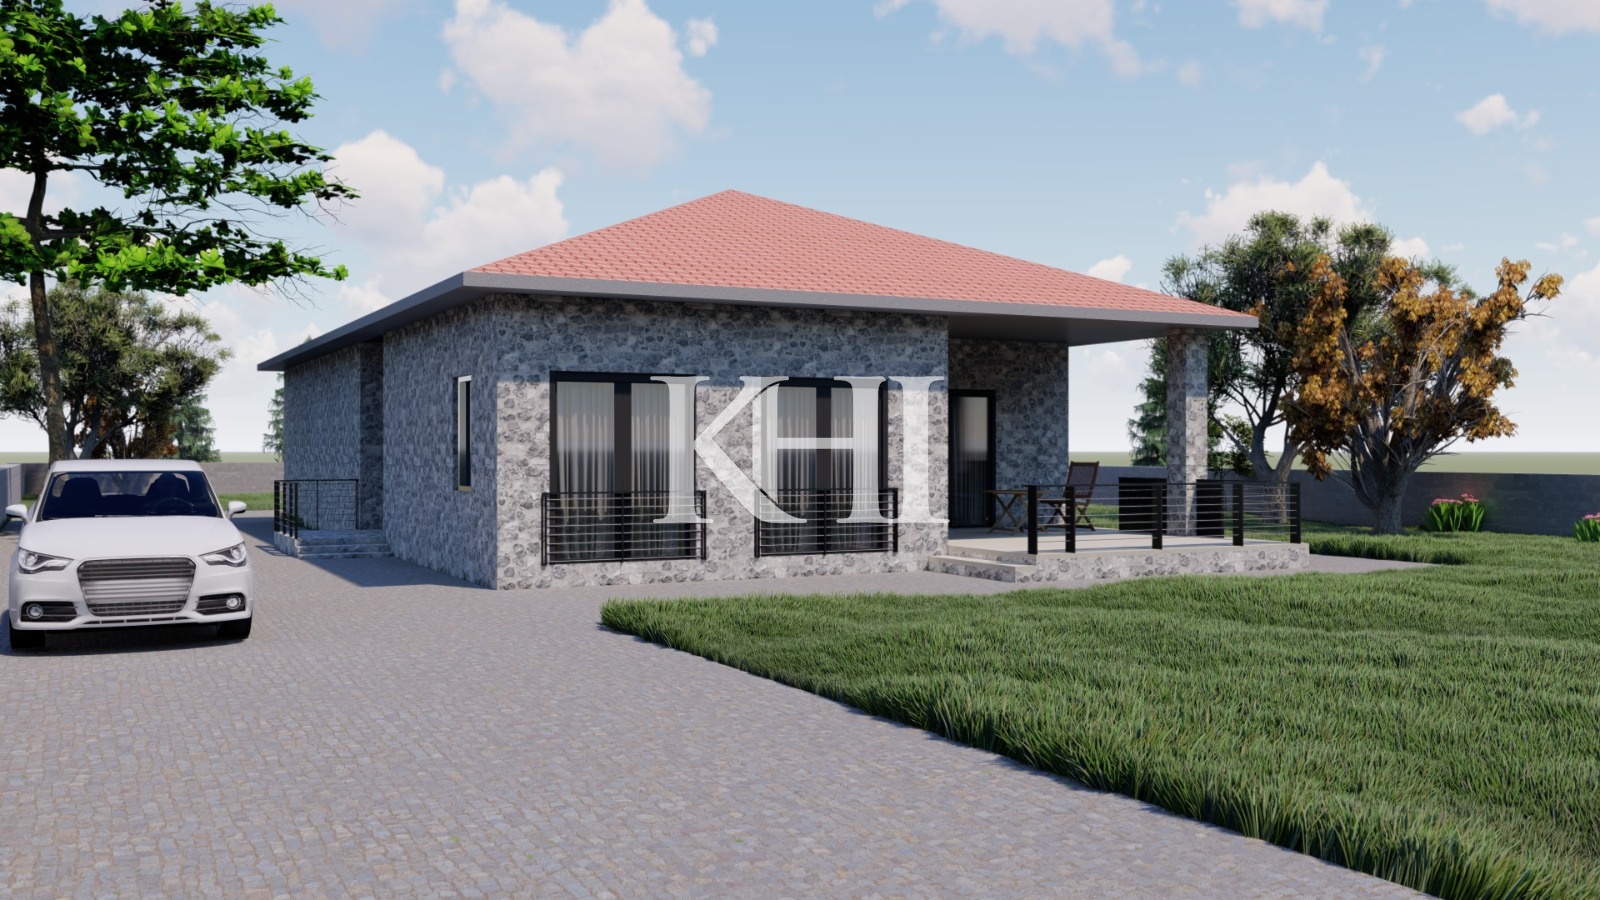 New Stone Bungalow in Nif Slide Image 1